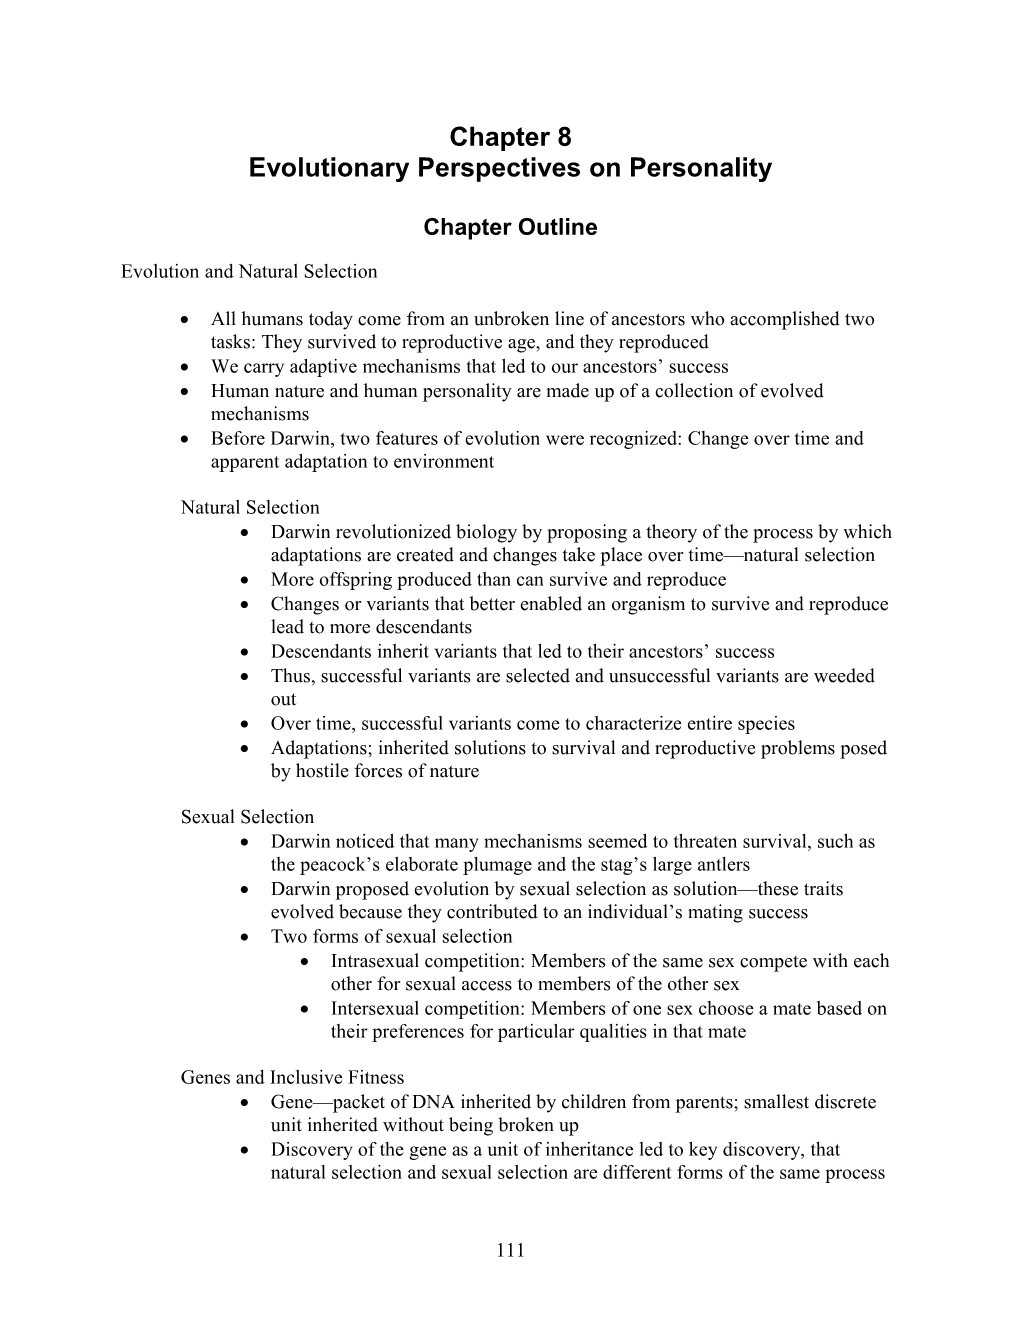 Evolutionary Perspectives on Personality